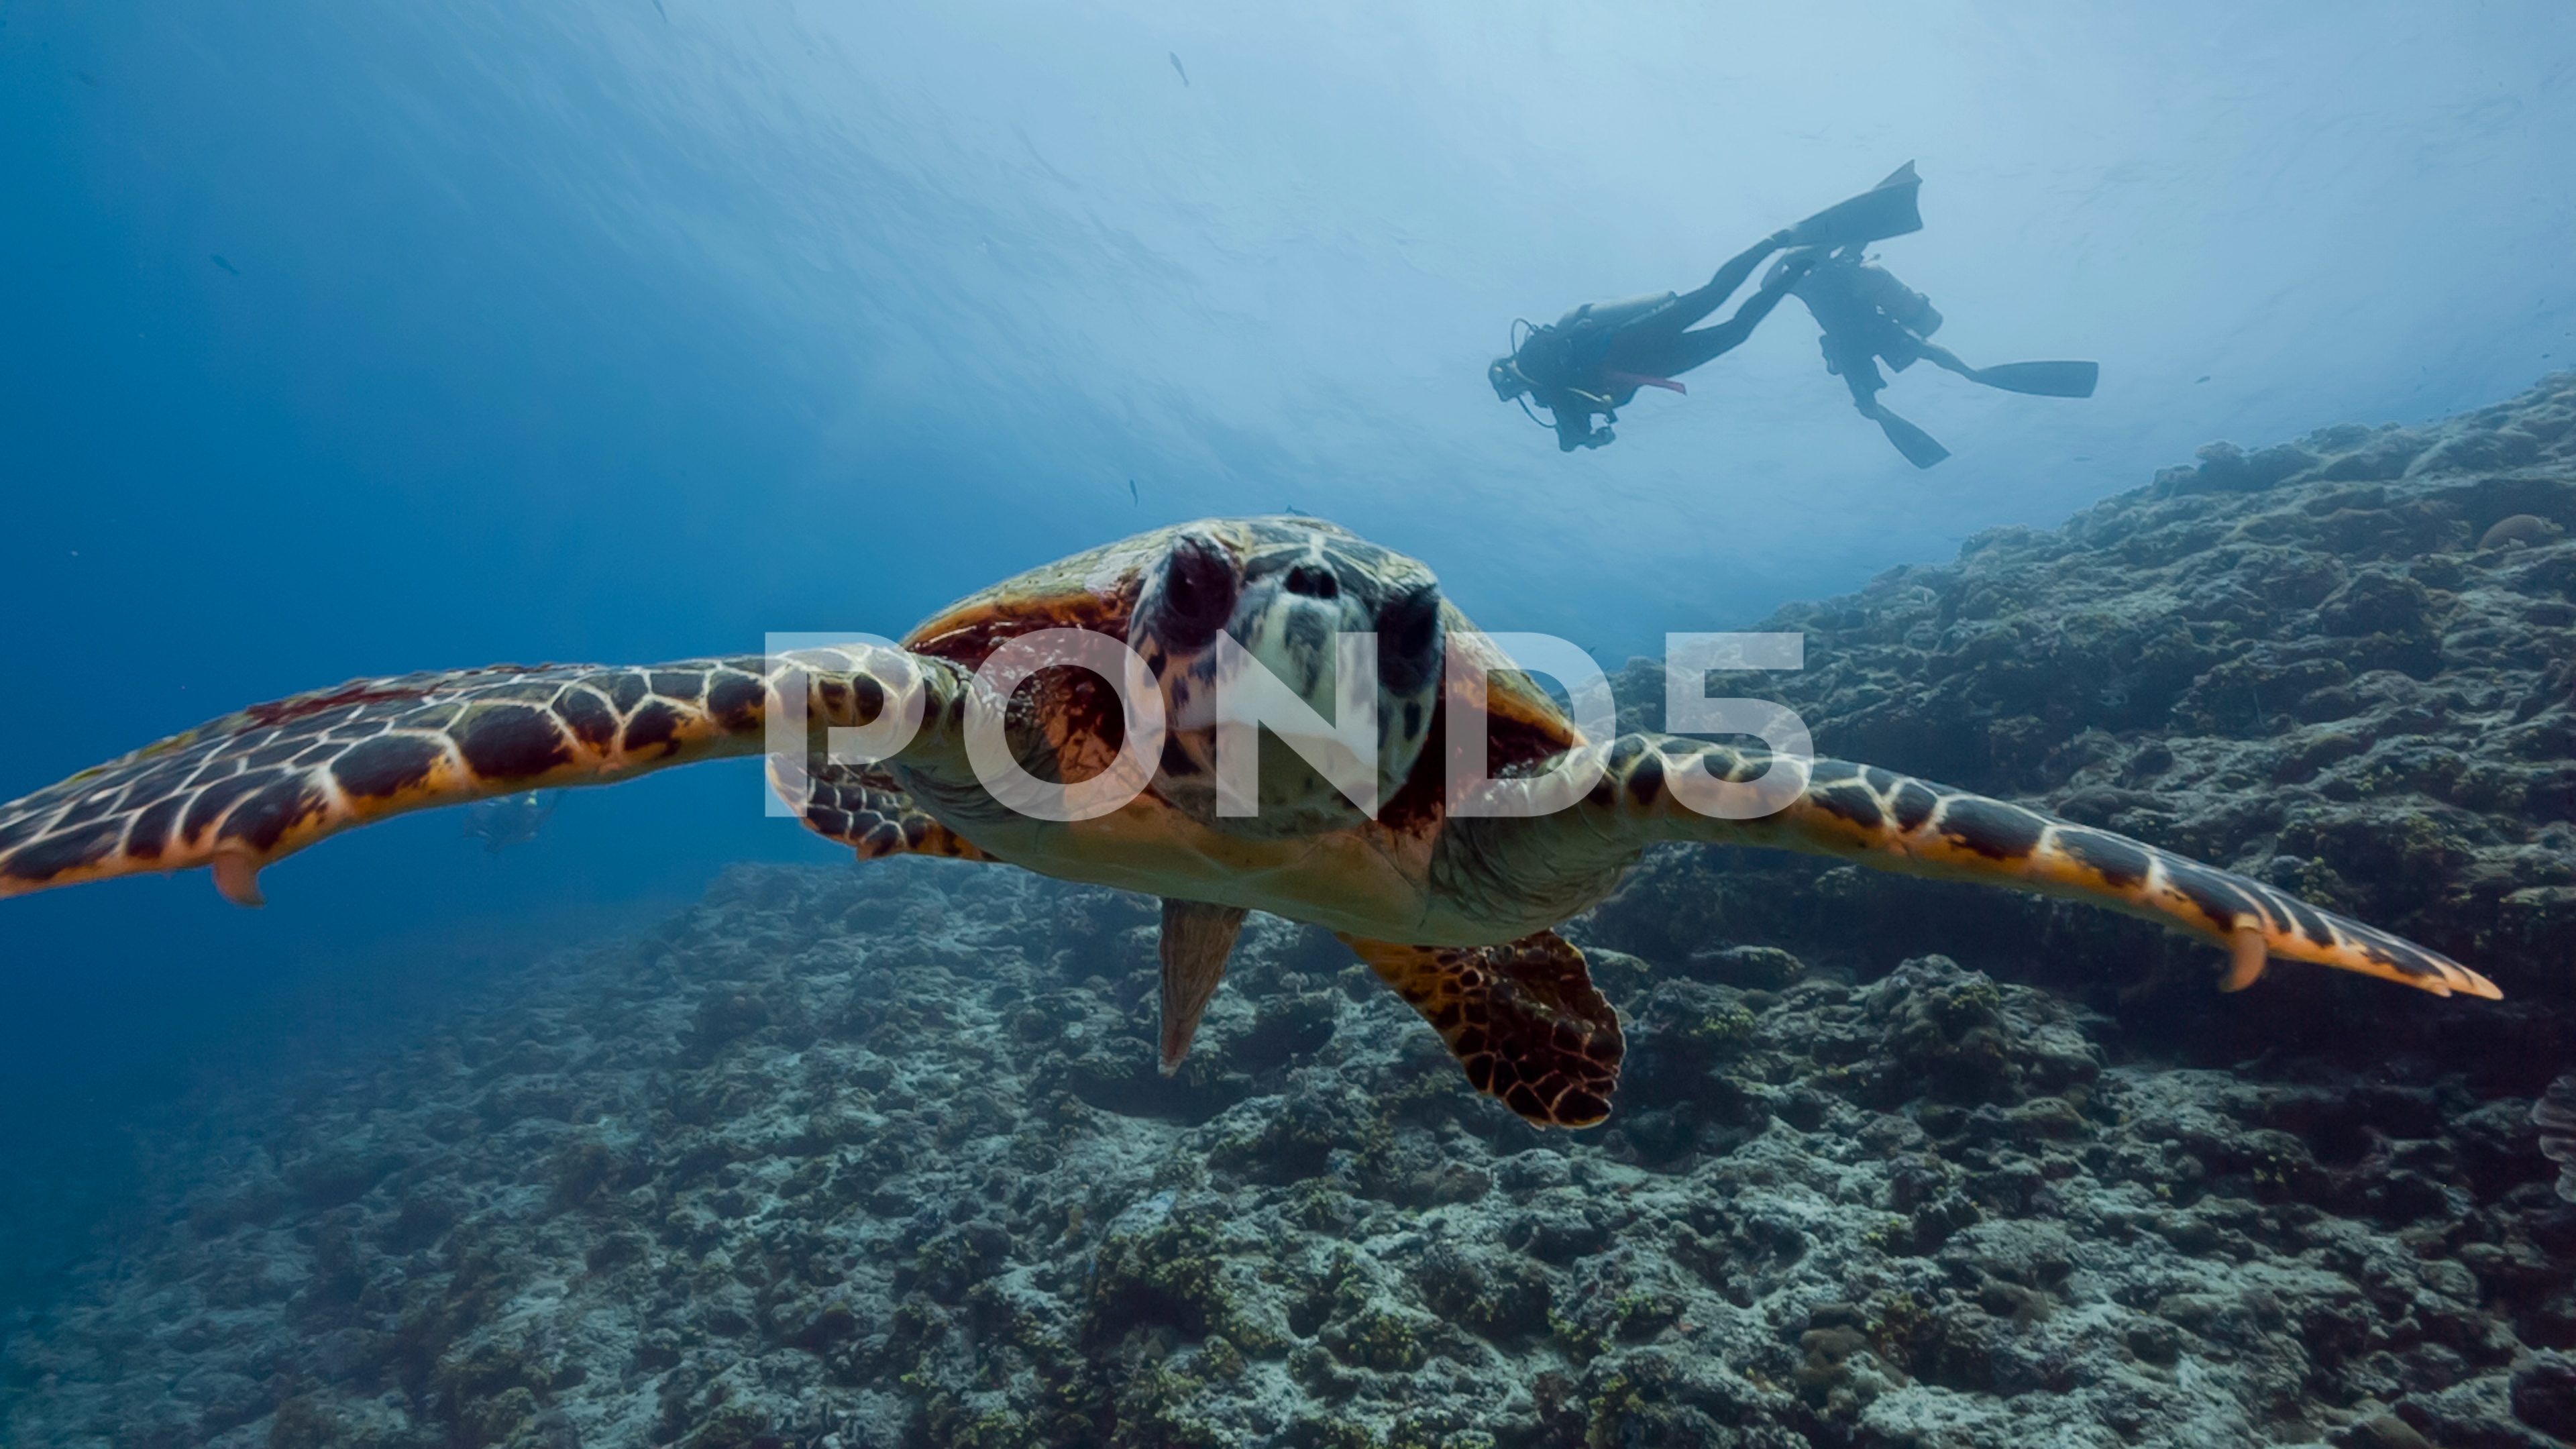 Stock Video: Curious Turtle Underwater ~ #73860674 | Pond5